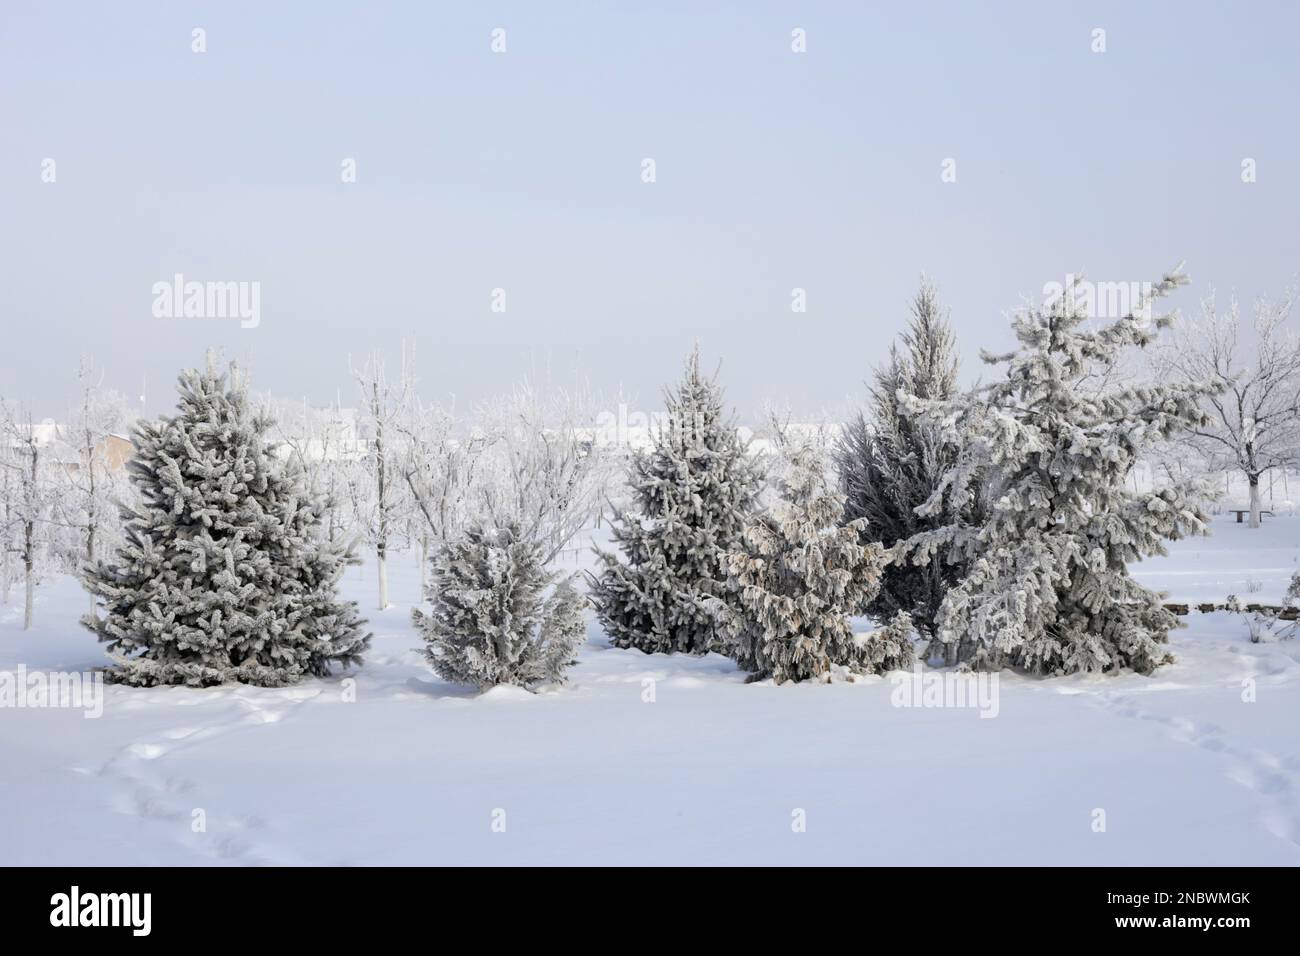 Evergreen trees in the garden covered by snow blanket, the still beauty of winter season. Stock Photo